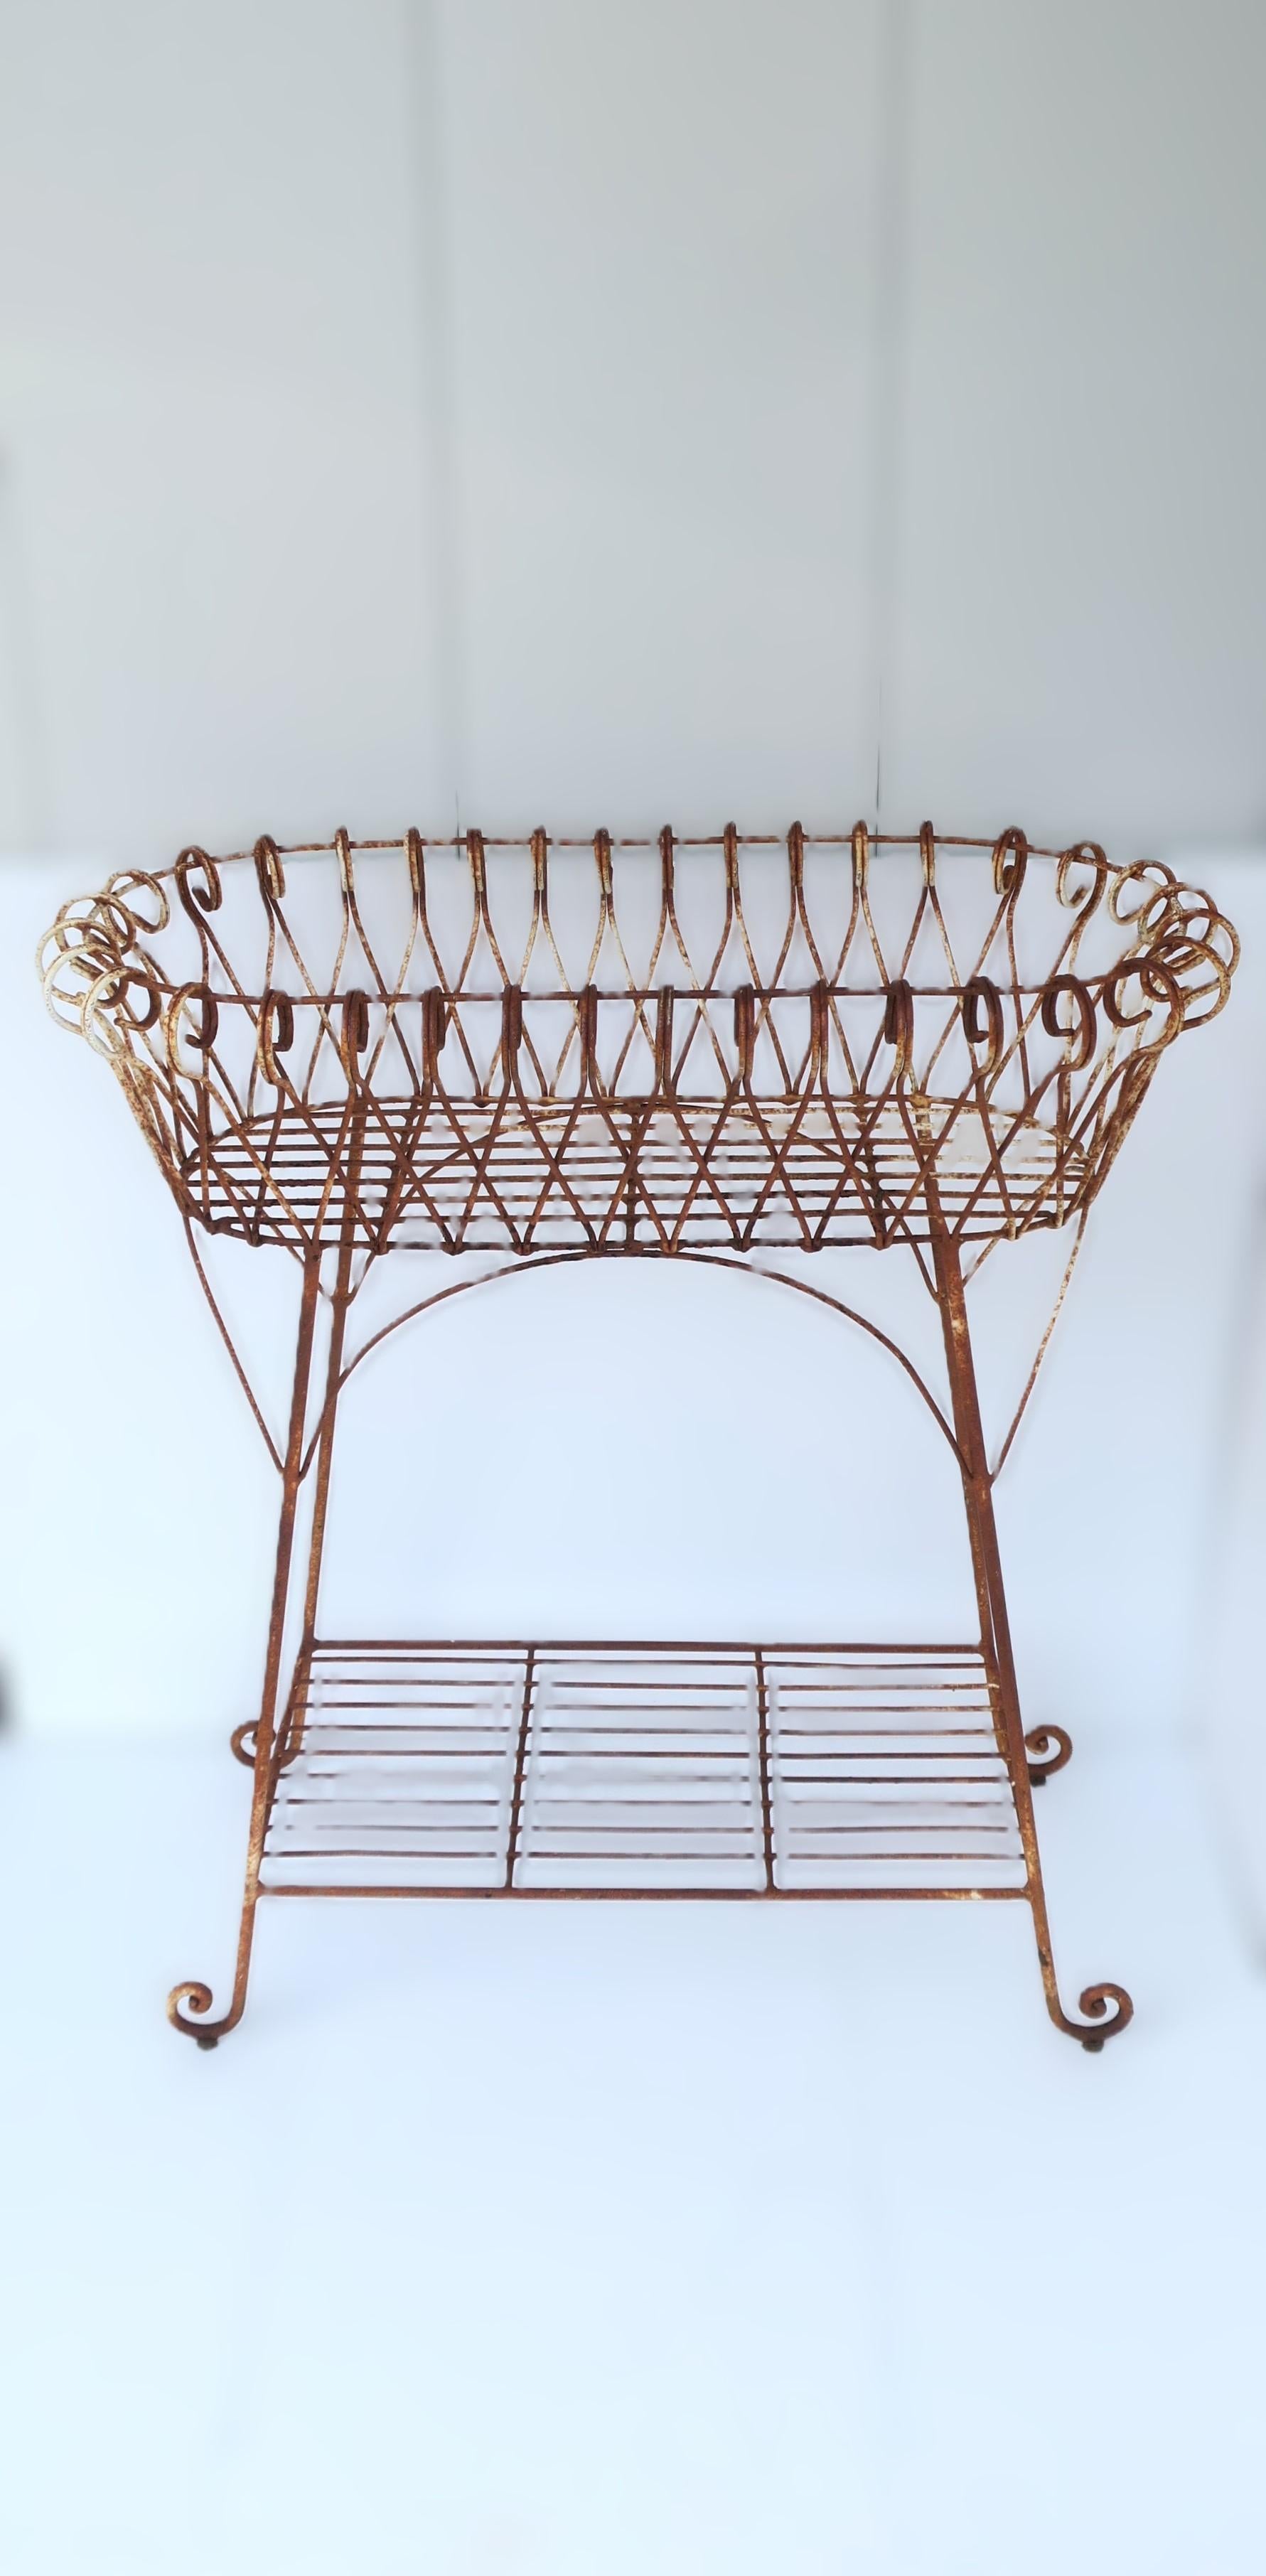 A French iron garden plant pot holder stand jardiniere, circa early-20th century, France. This sculptural flower or plant holder displays beautifully; piece is oblong iron with accentuated and whimsical scrolls over top sides of oval basket area,